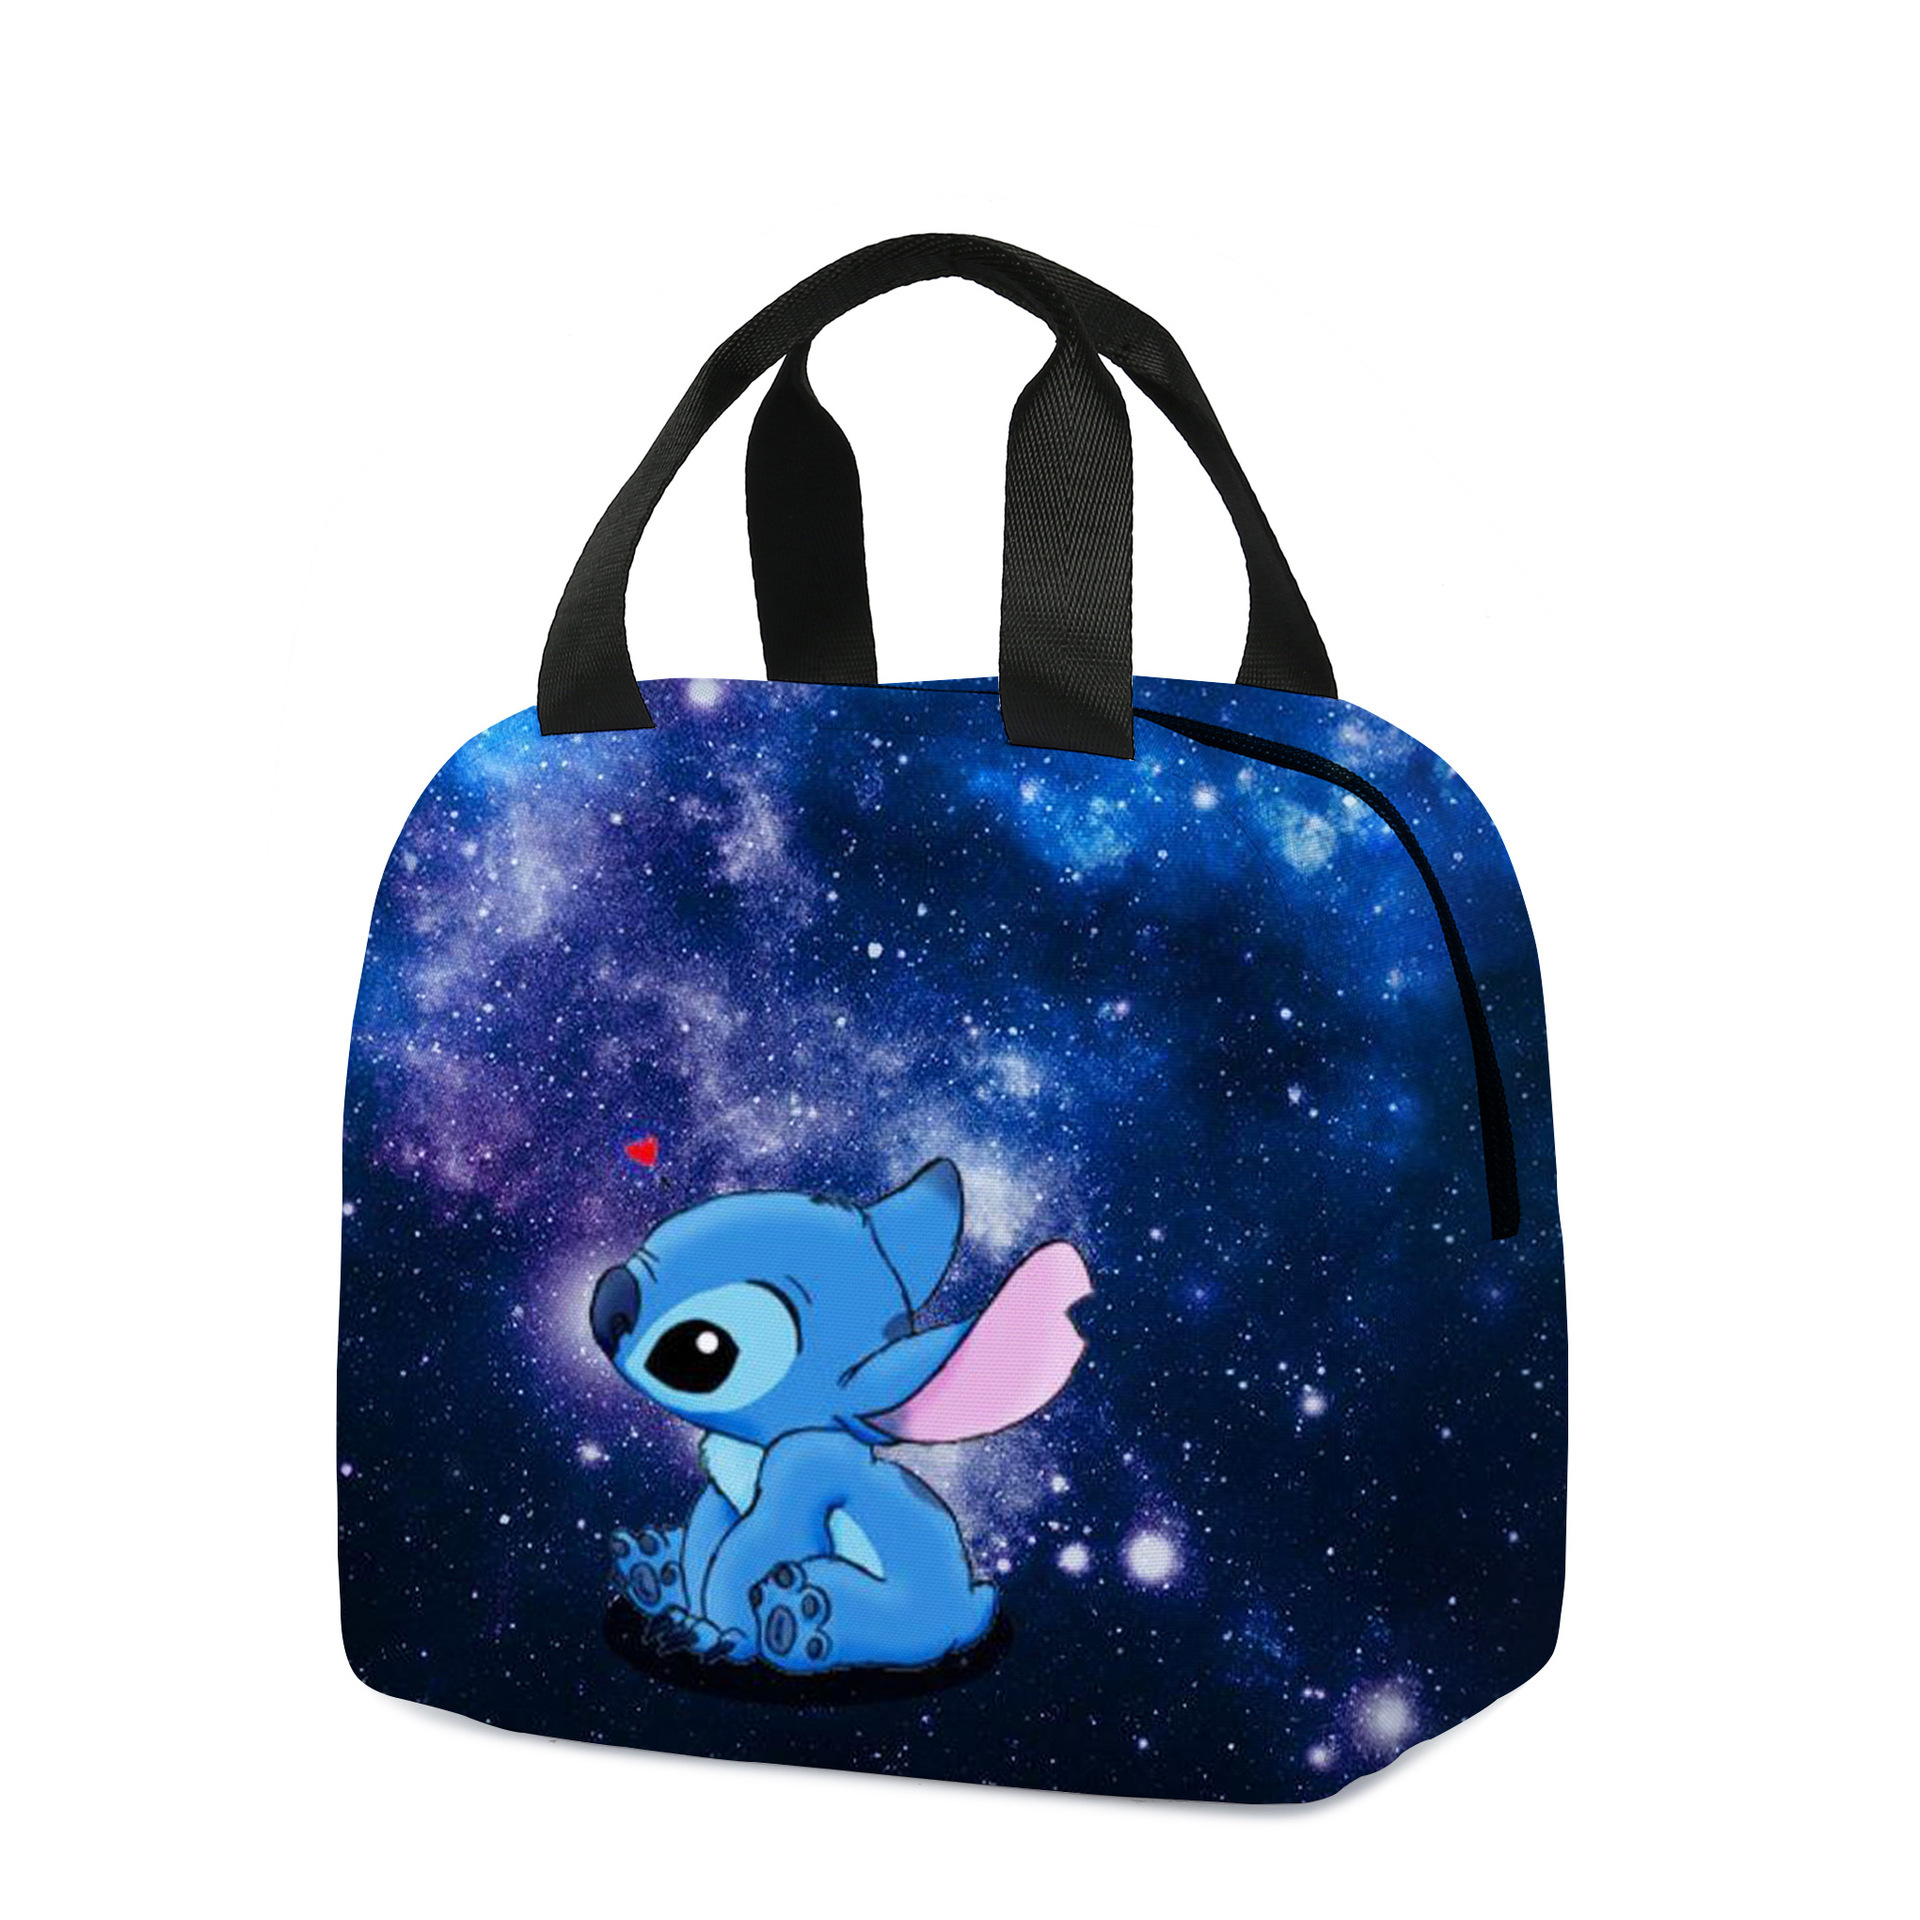 Products in Stock New Cartoon Stitch Stitch Children Lunch Bag Primary School Students Lunch Box Bag Ice Pack